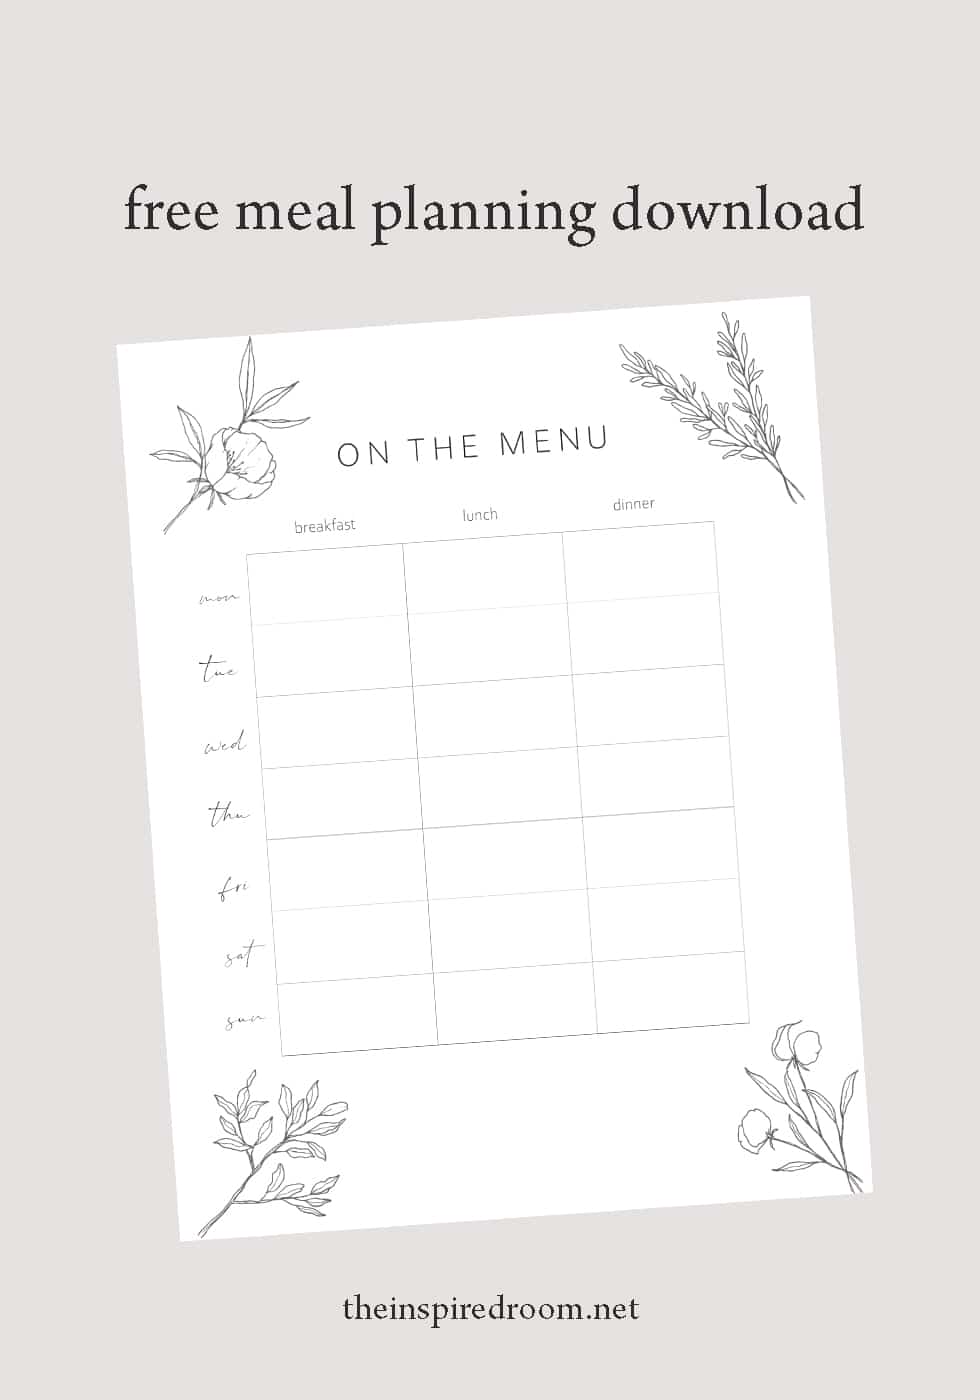 Free Meal Planning Download + 3 Reasons Meal Planning Will Improve Your Life